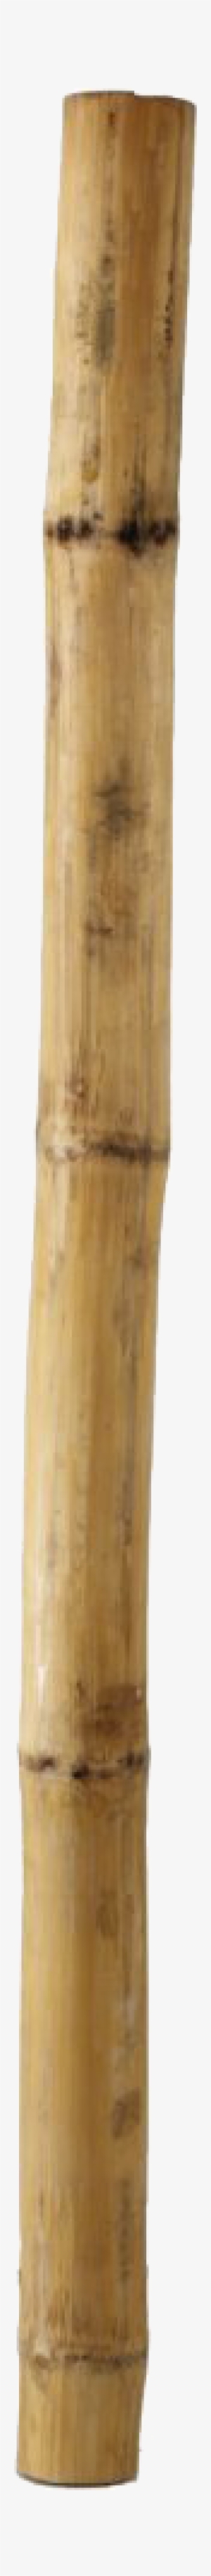 Bamboo Stick Png Pic - Png Image Of Stick